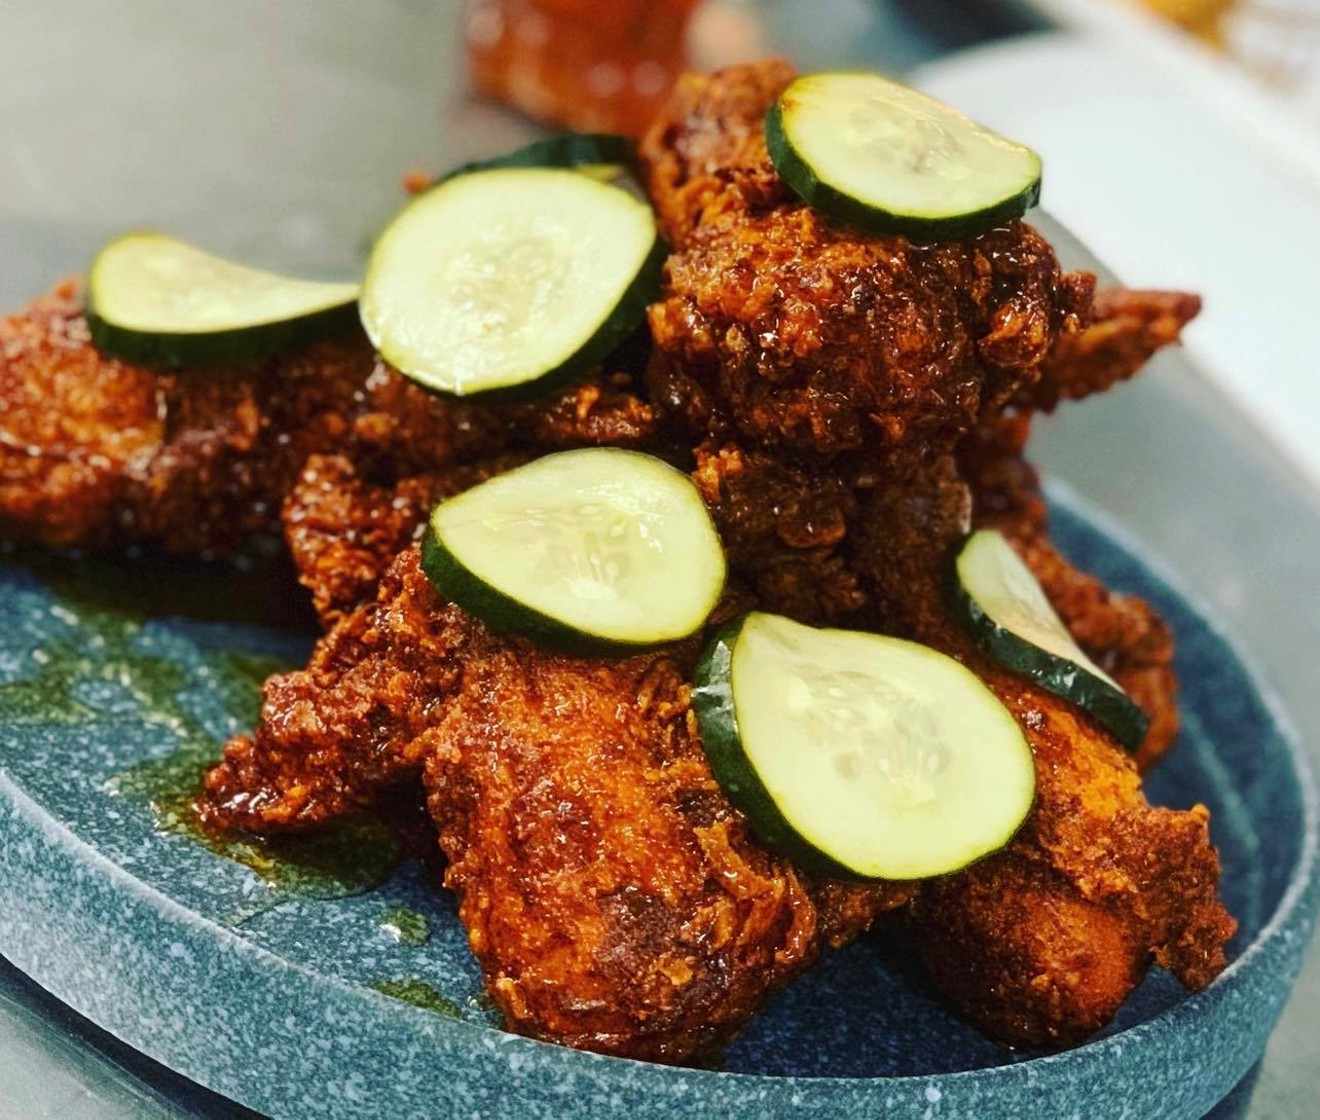 Southern fried chicken is the specialty of the house at Grind.